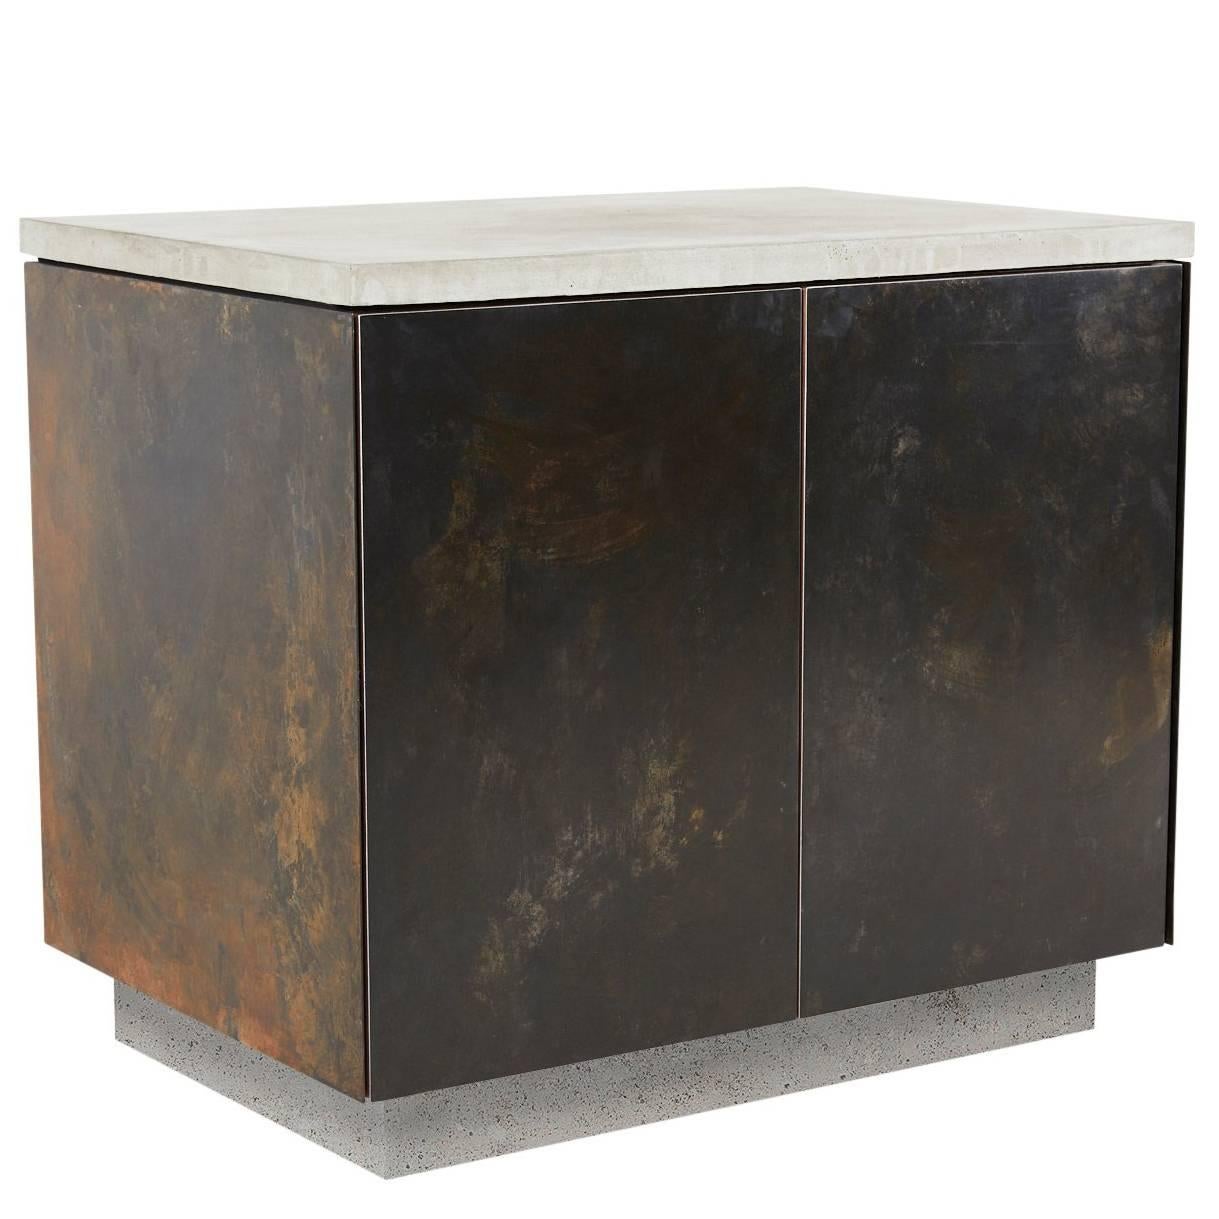 Patinated Steel, Cast-Concrete and Walnut "S.O. Side Table" with Doors